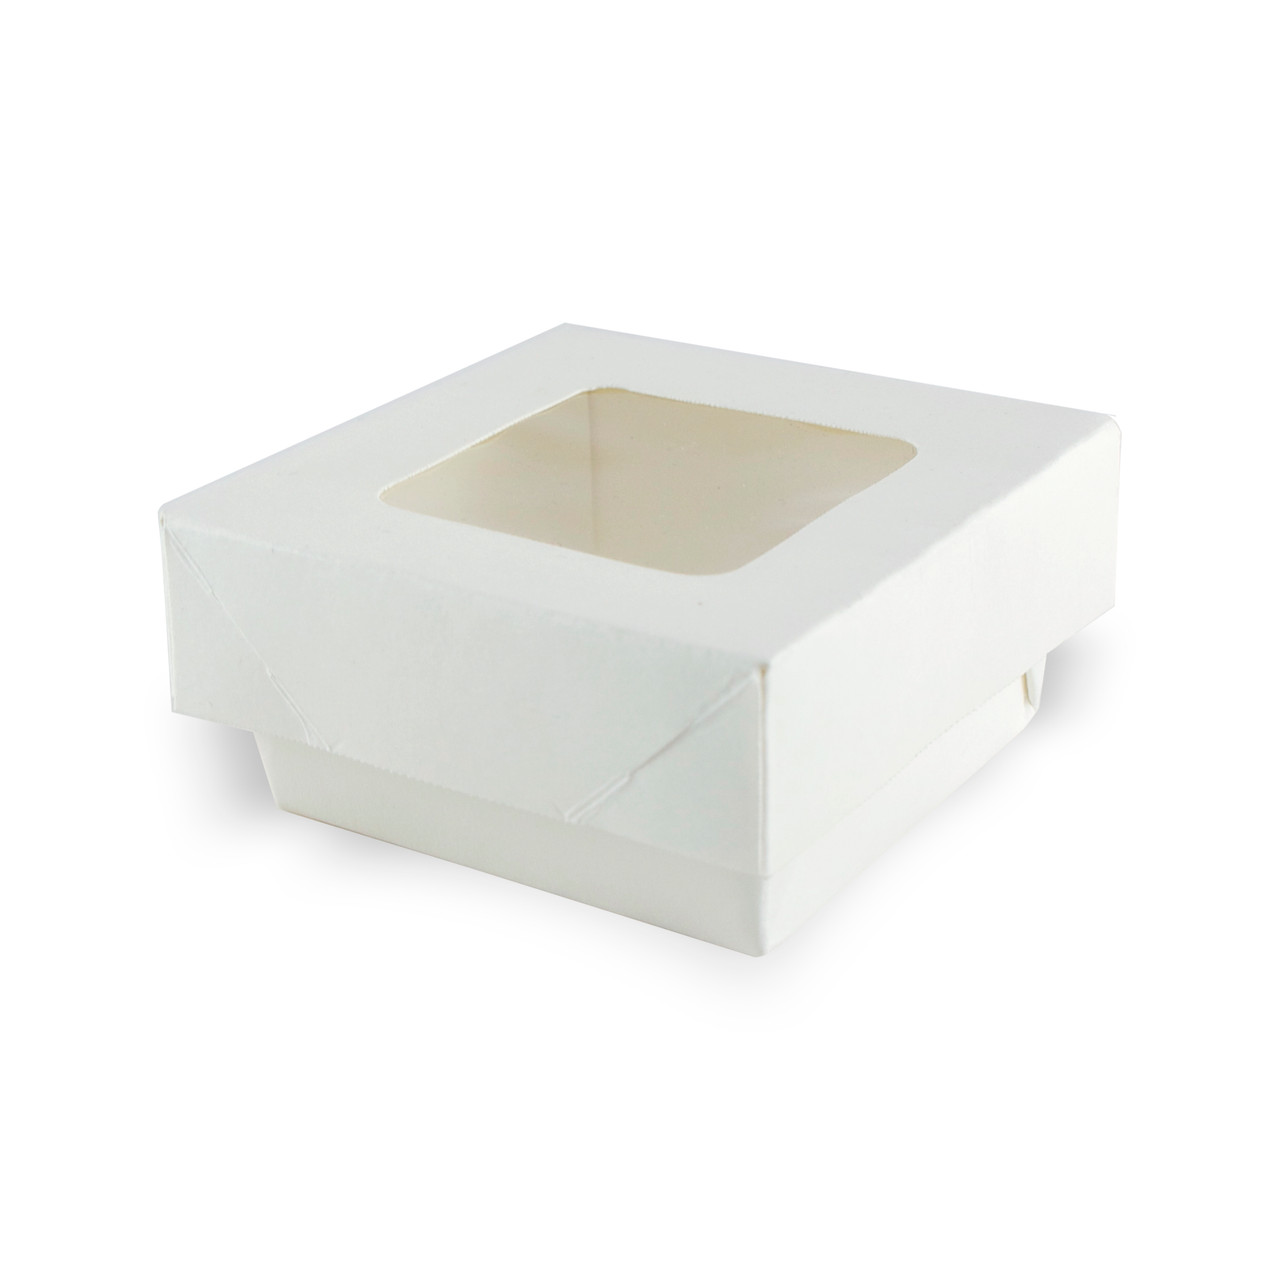 White Kray Boxes With Pet Window Lid -7oz L:2.75 x W:2.75 x H:1.5in